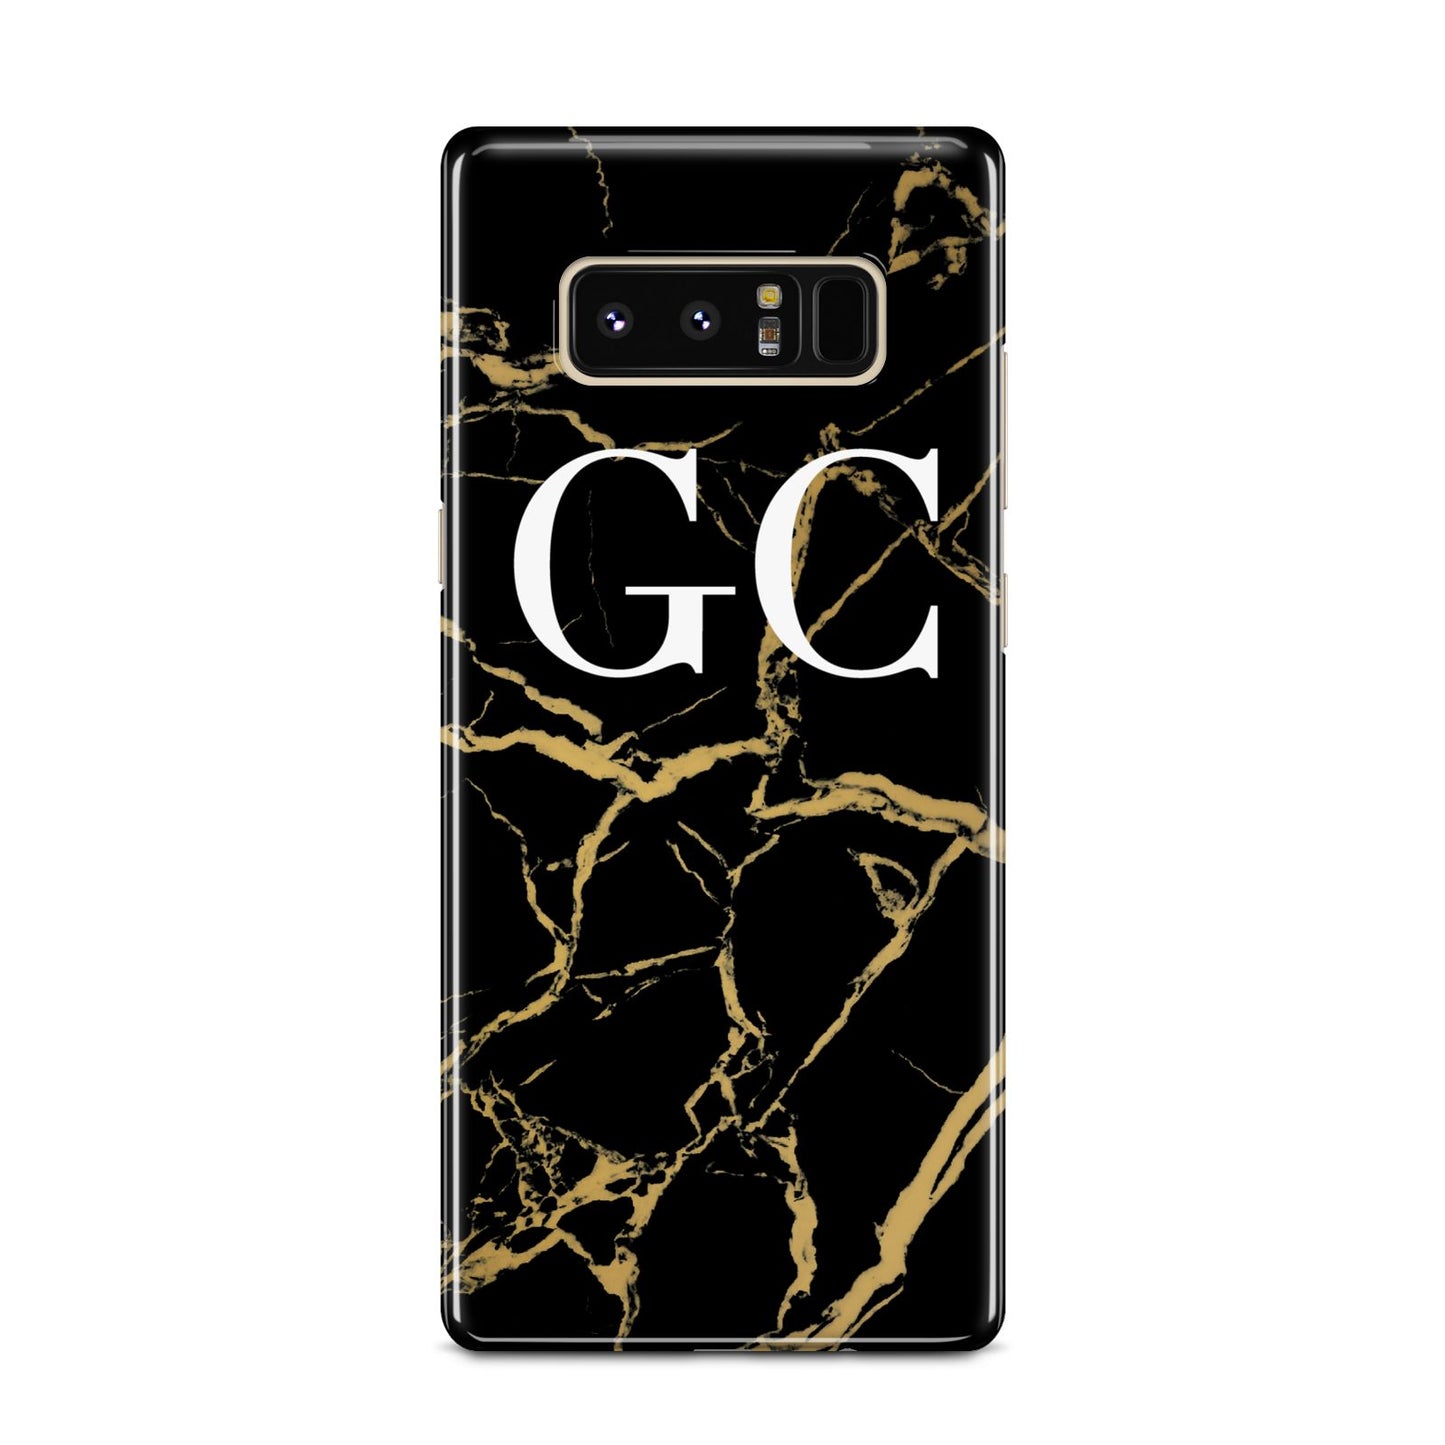 Personalised Gold Black Marble Monogram Samsung Galaxy Note 8 Case